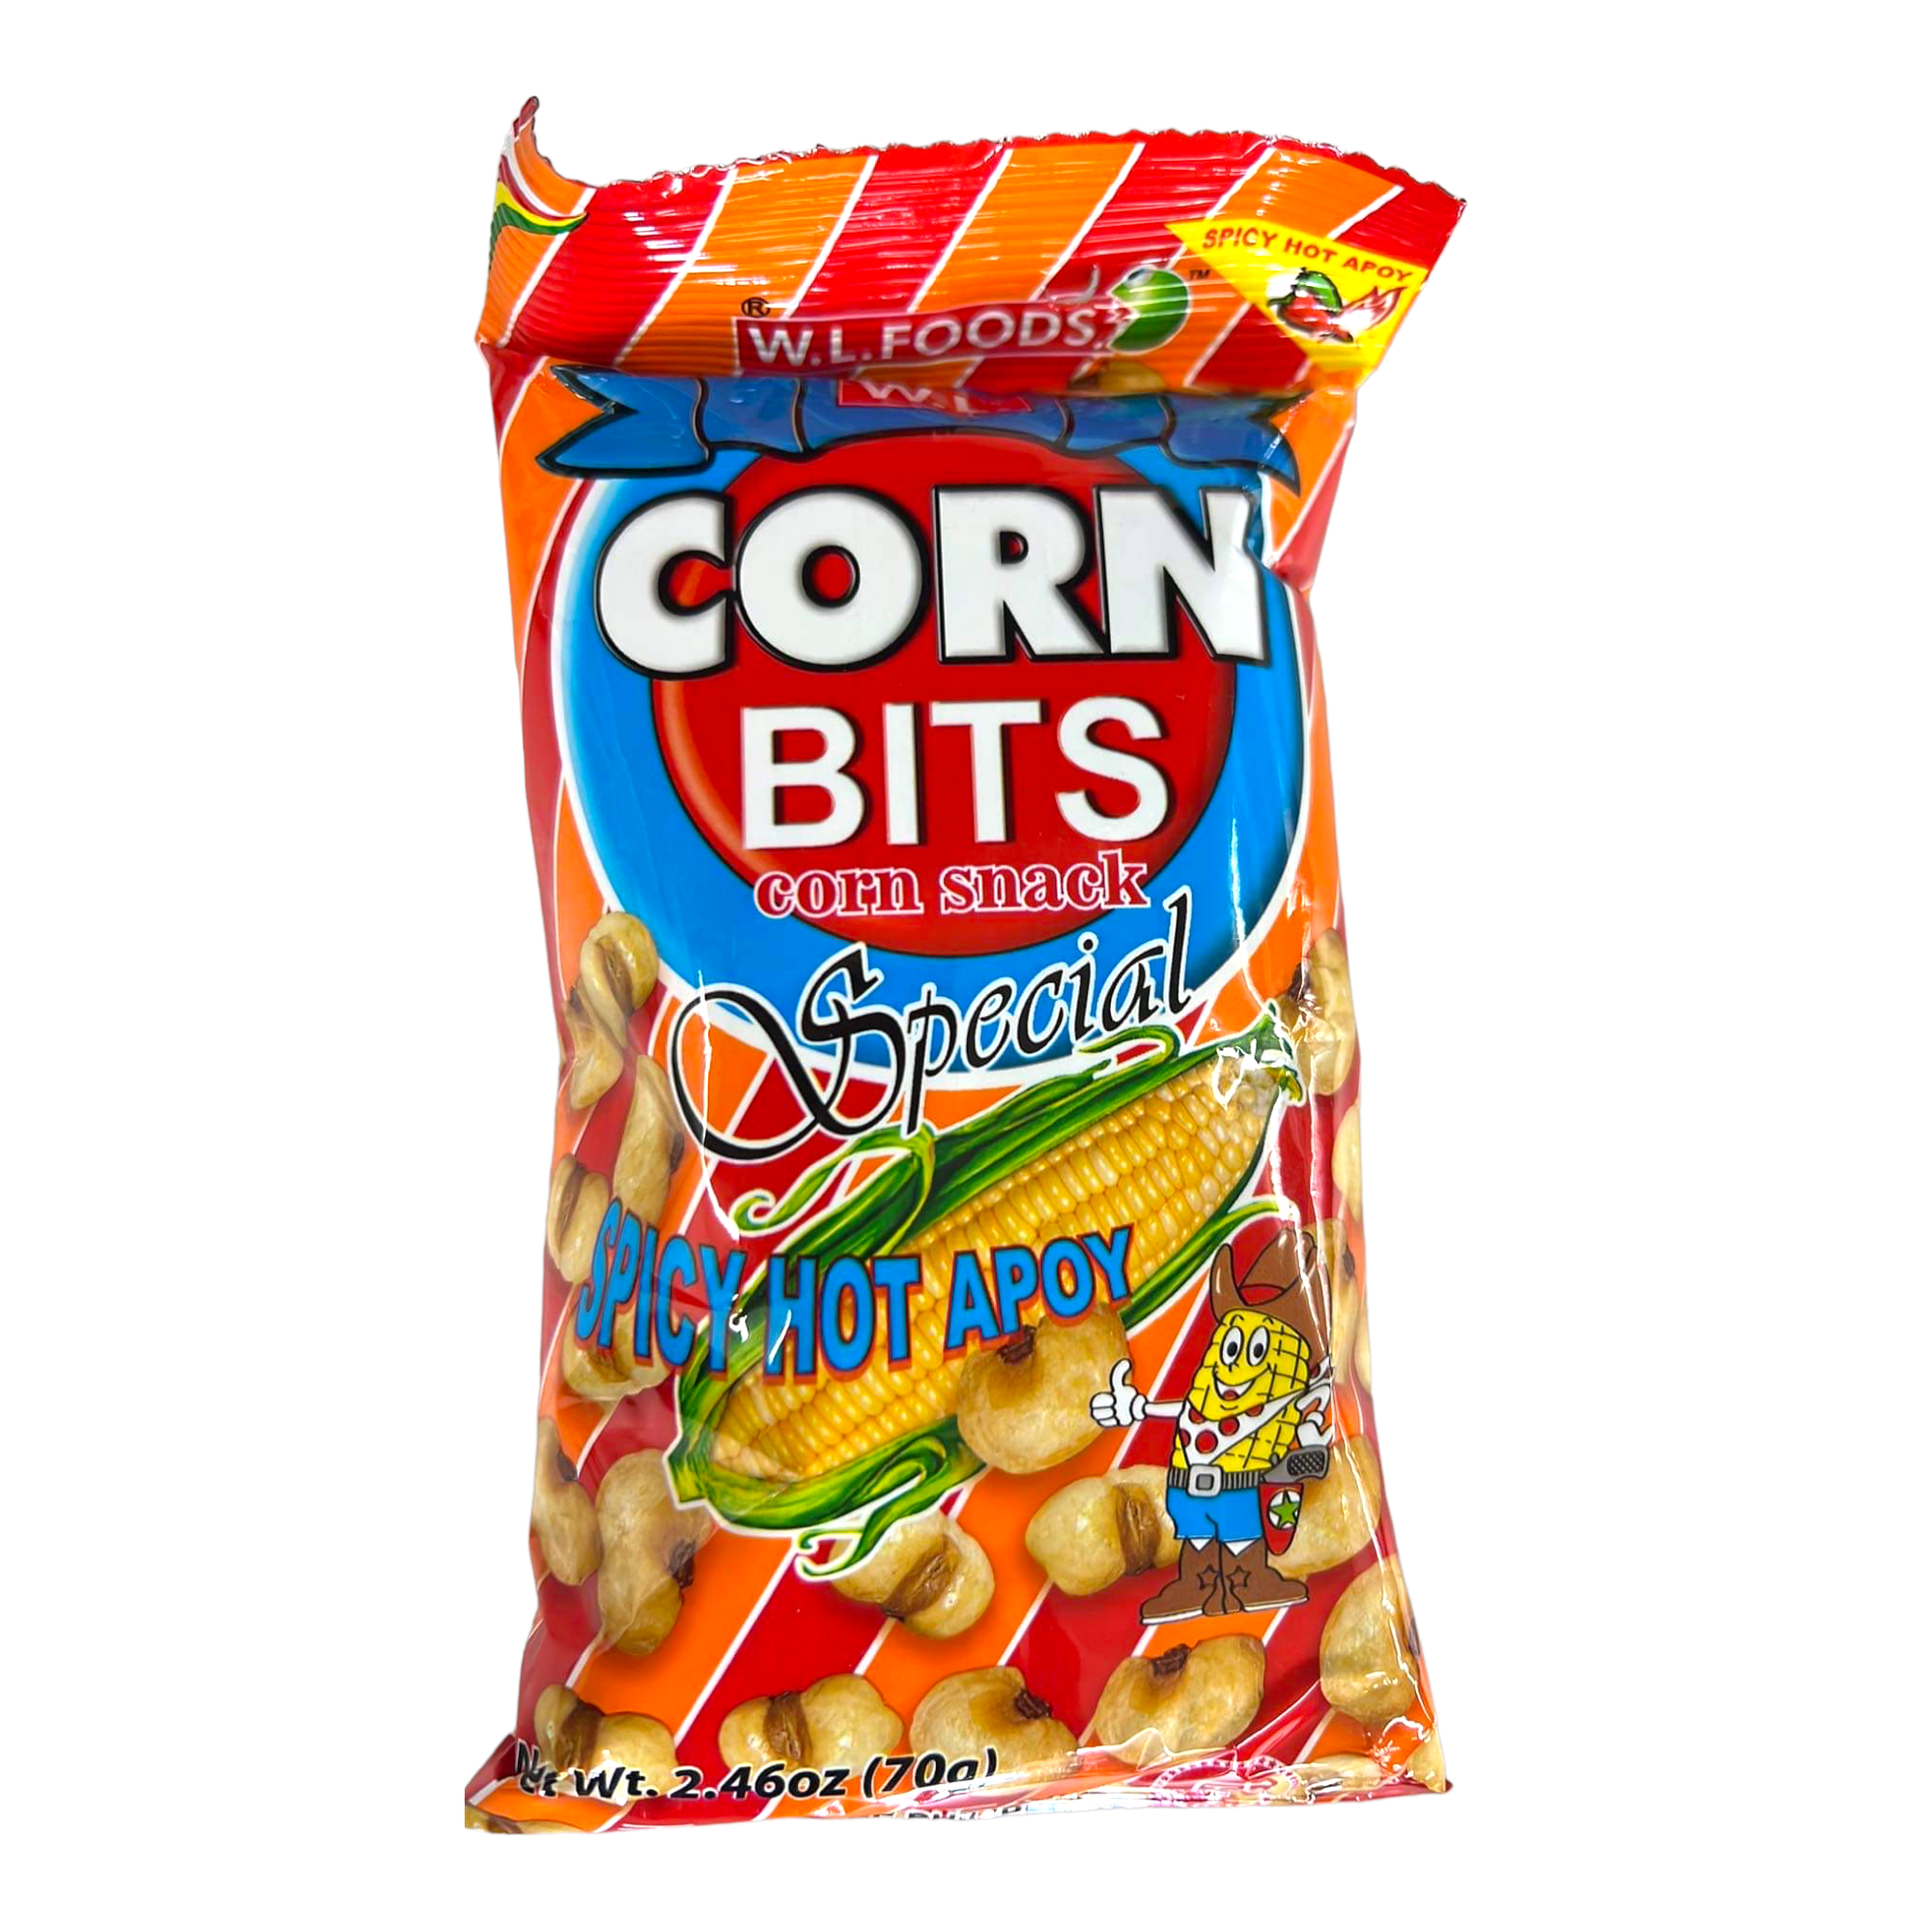 W.L. Foods - Corn Bits - Corn Snack Special - Spicy Hot Apoy - 70g